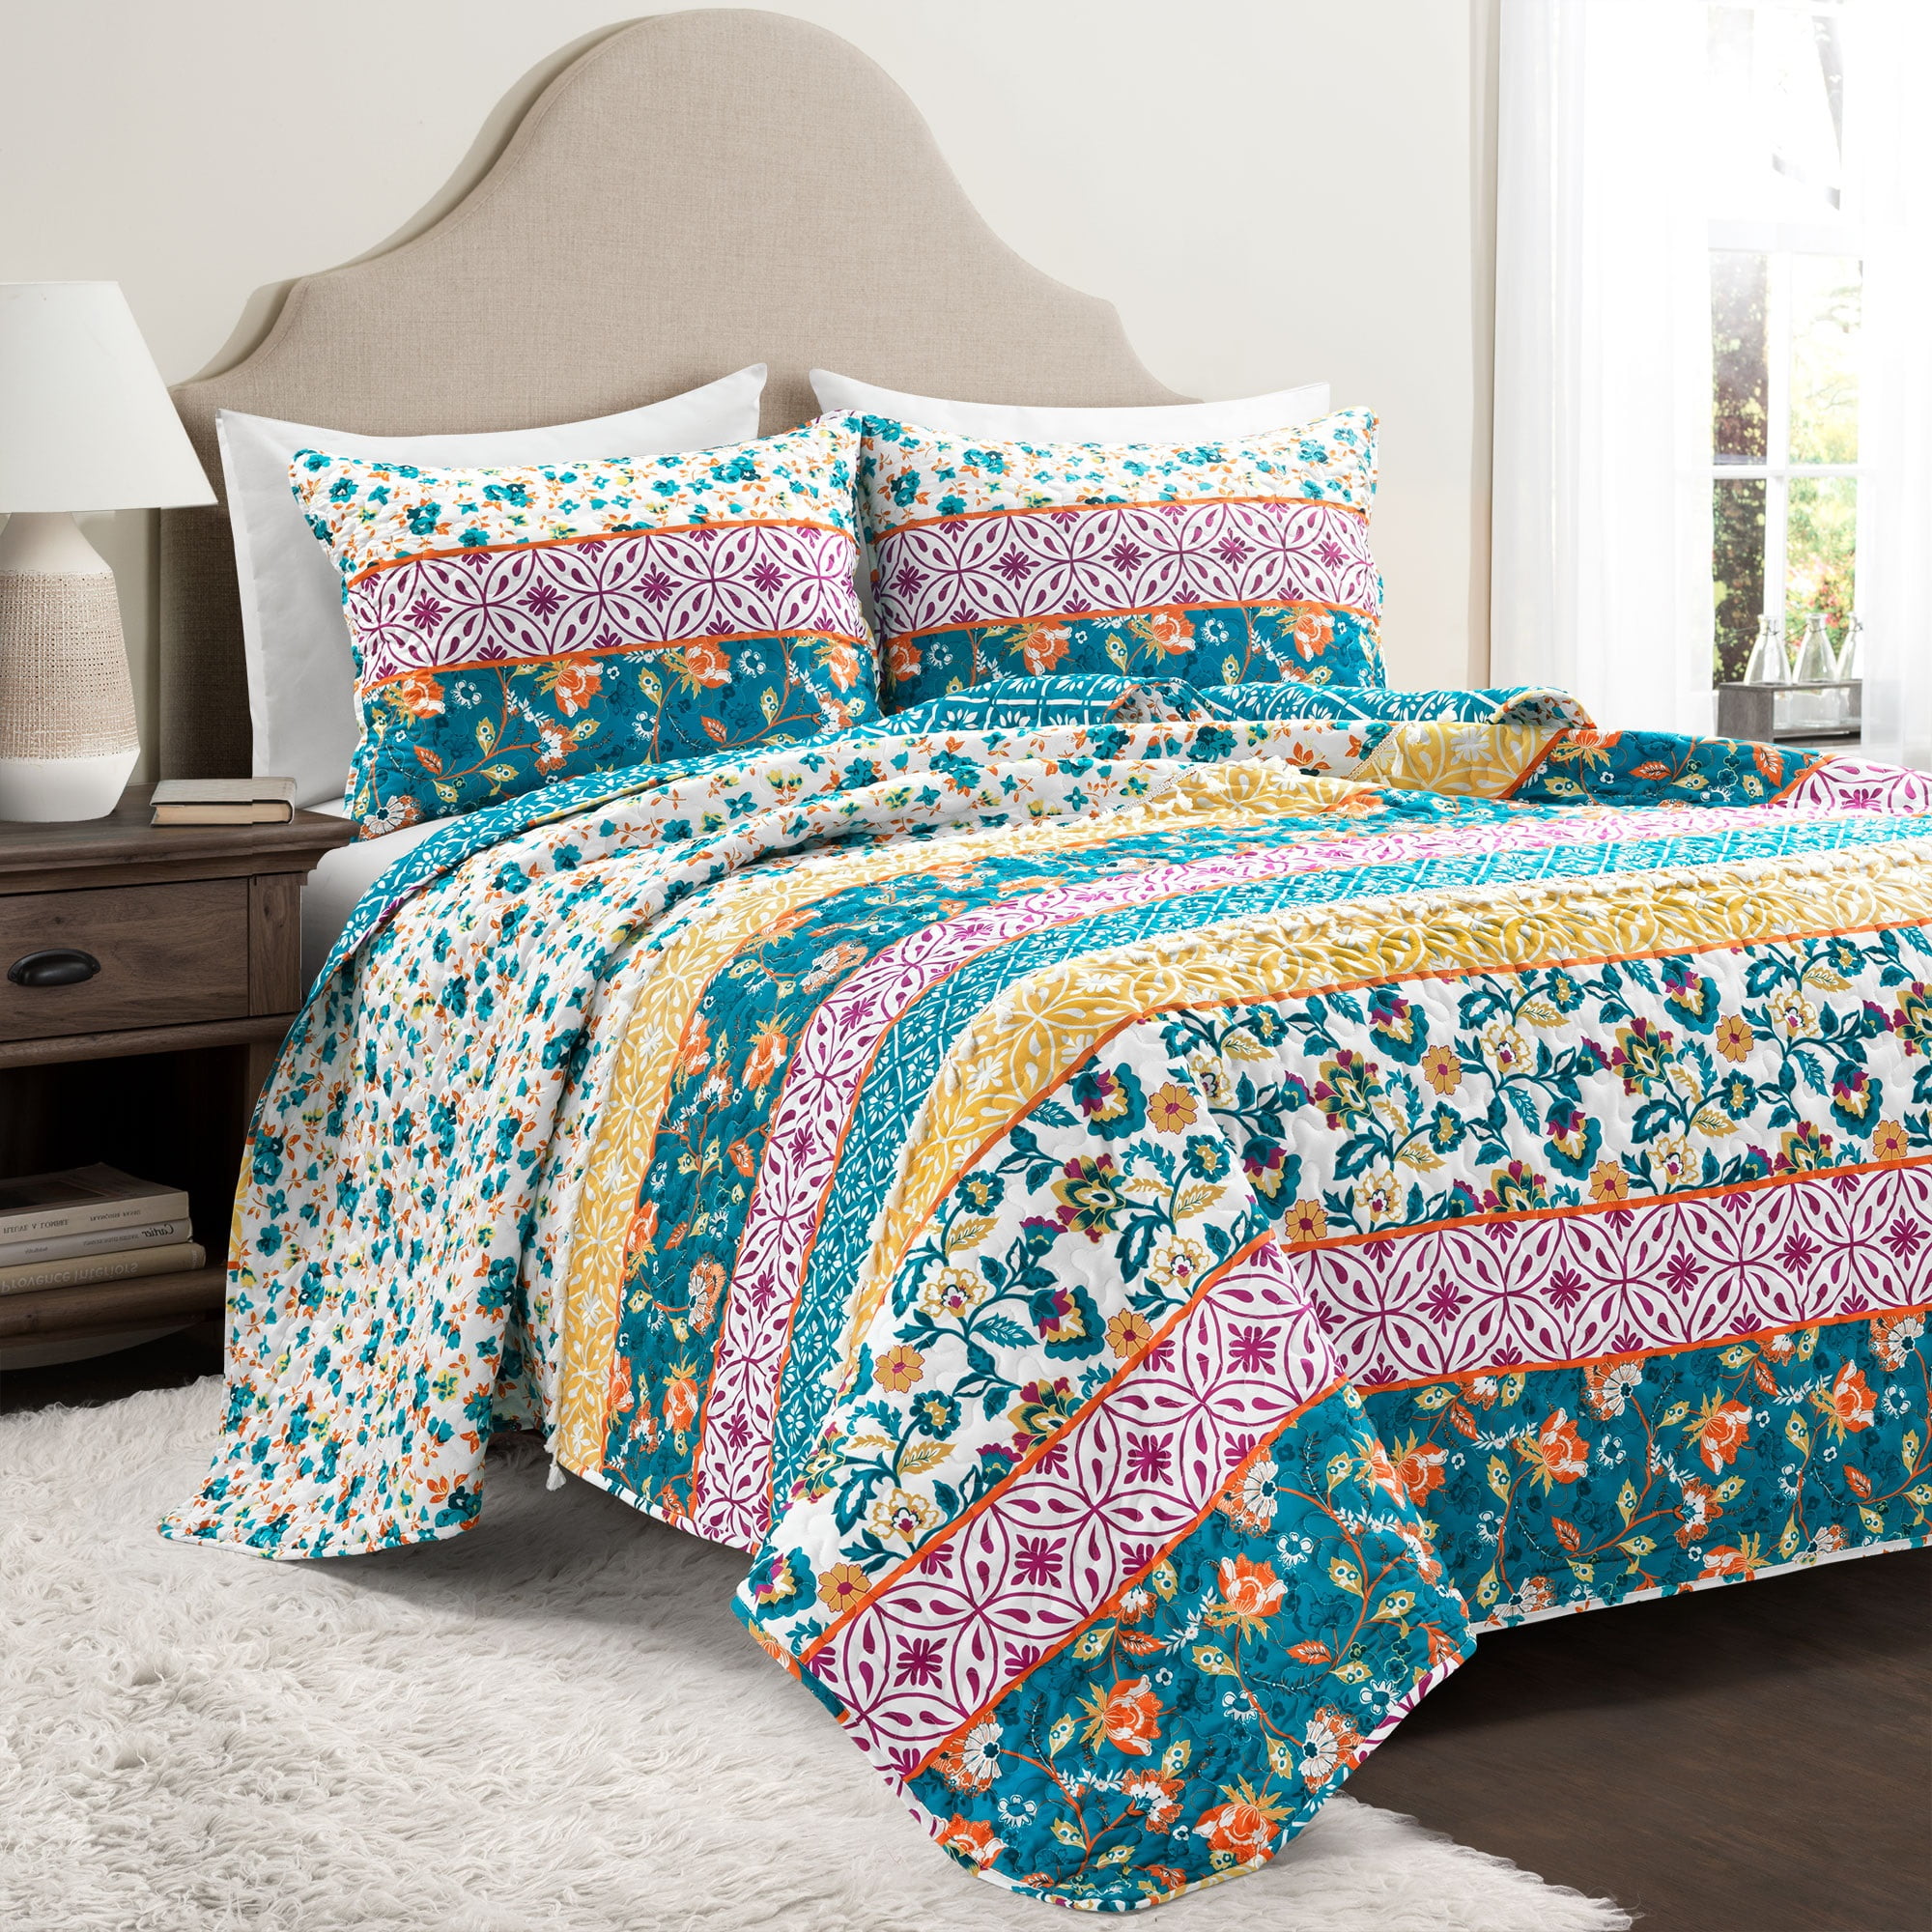 Details about   Winter High Quality Quilts Quilted Duvet Patchwork Bedding Comforter Blankets 